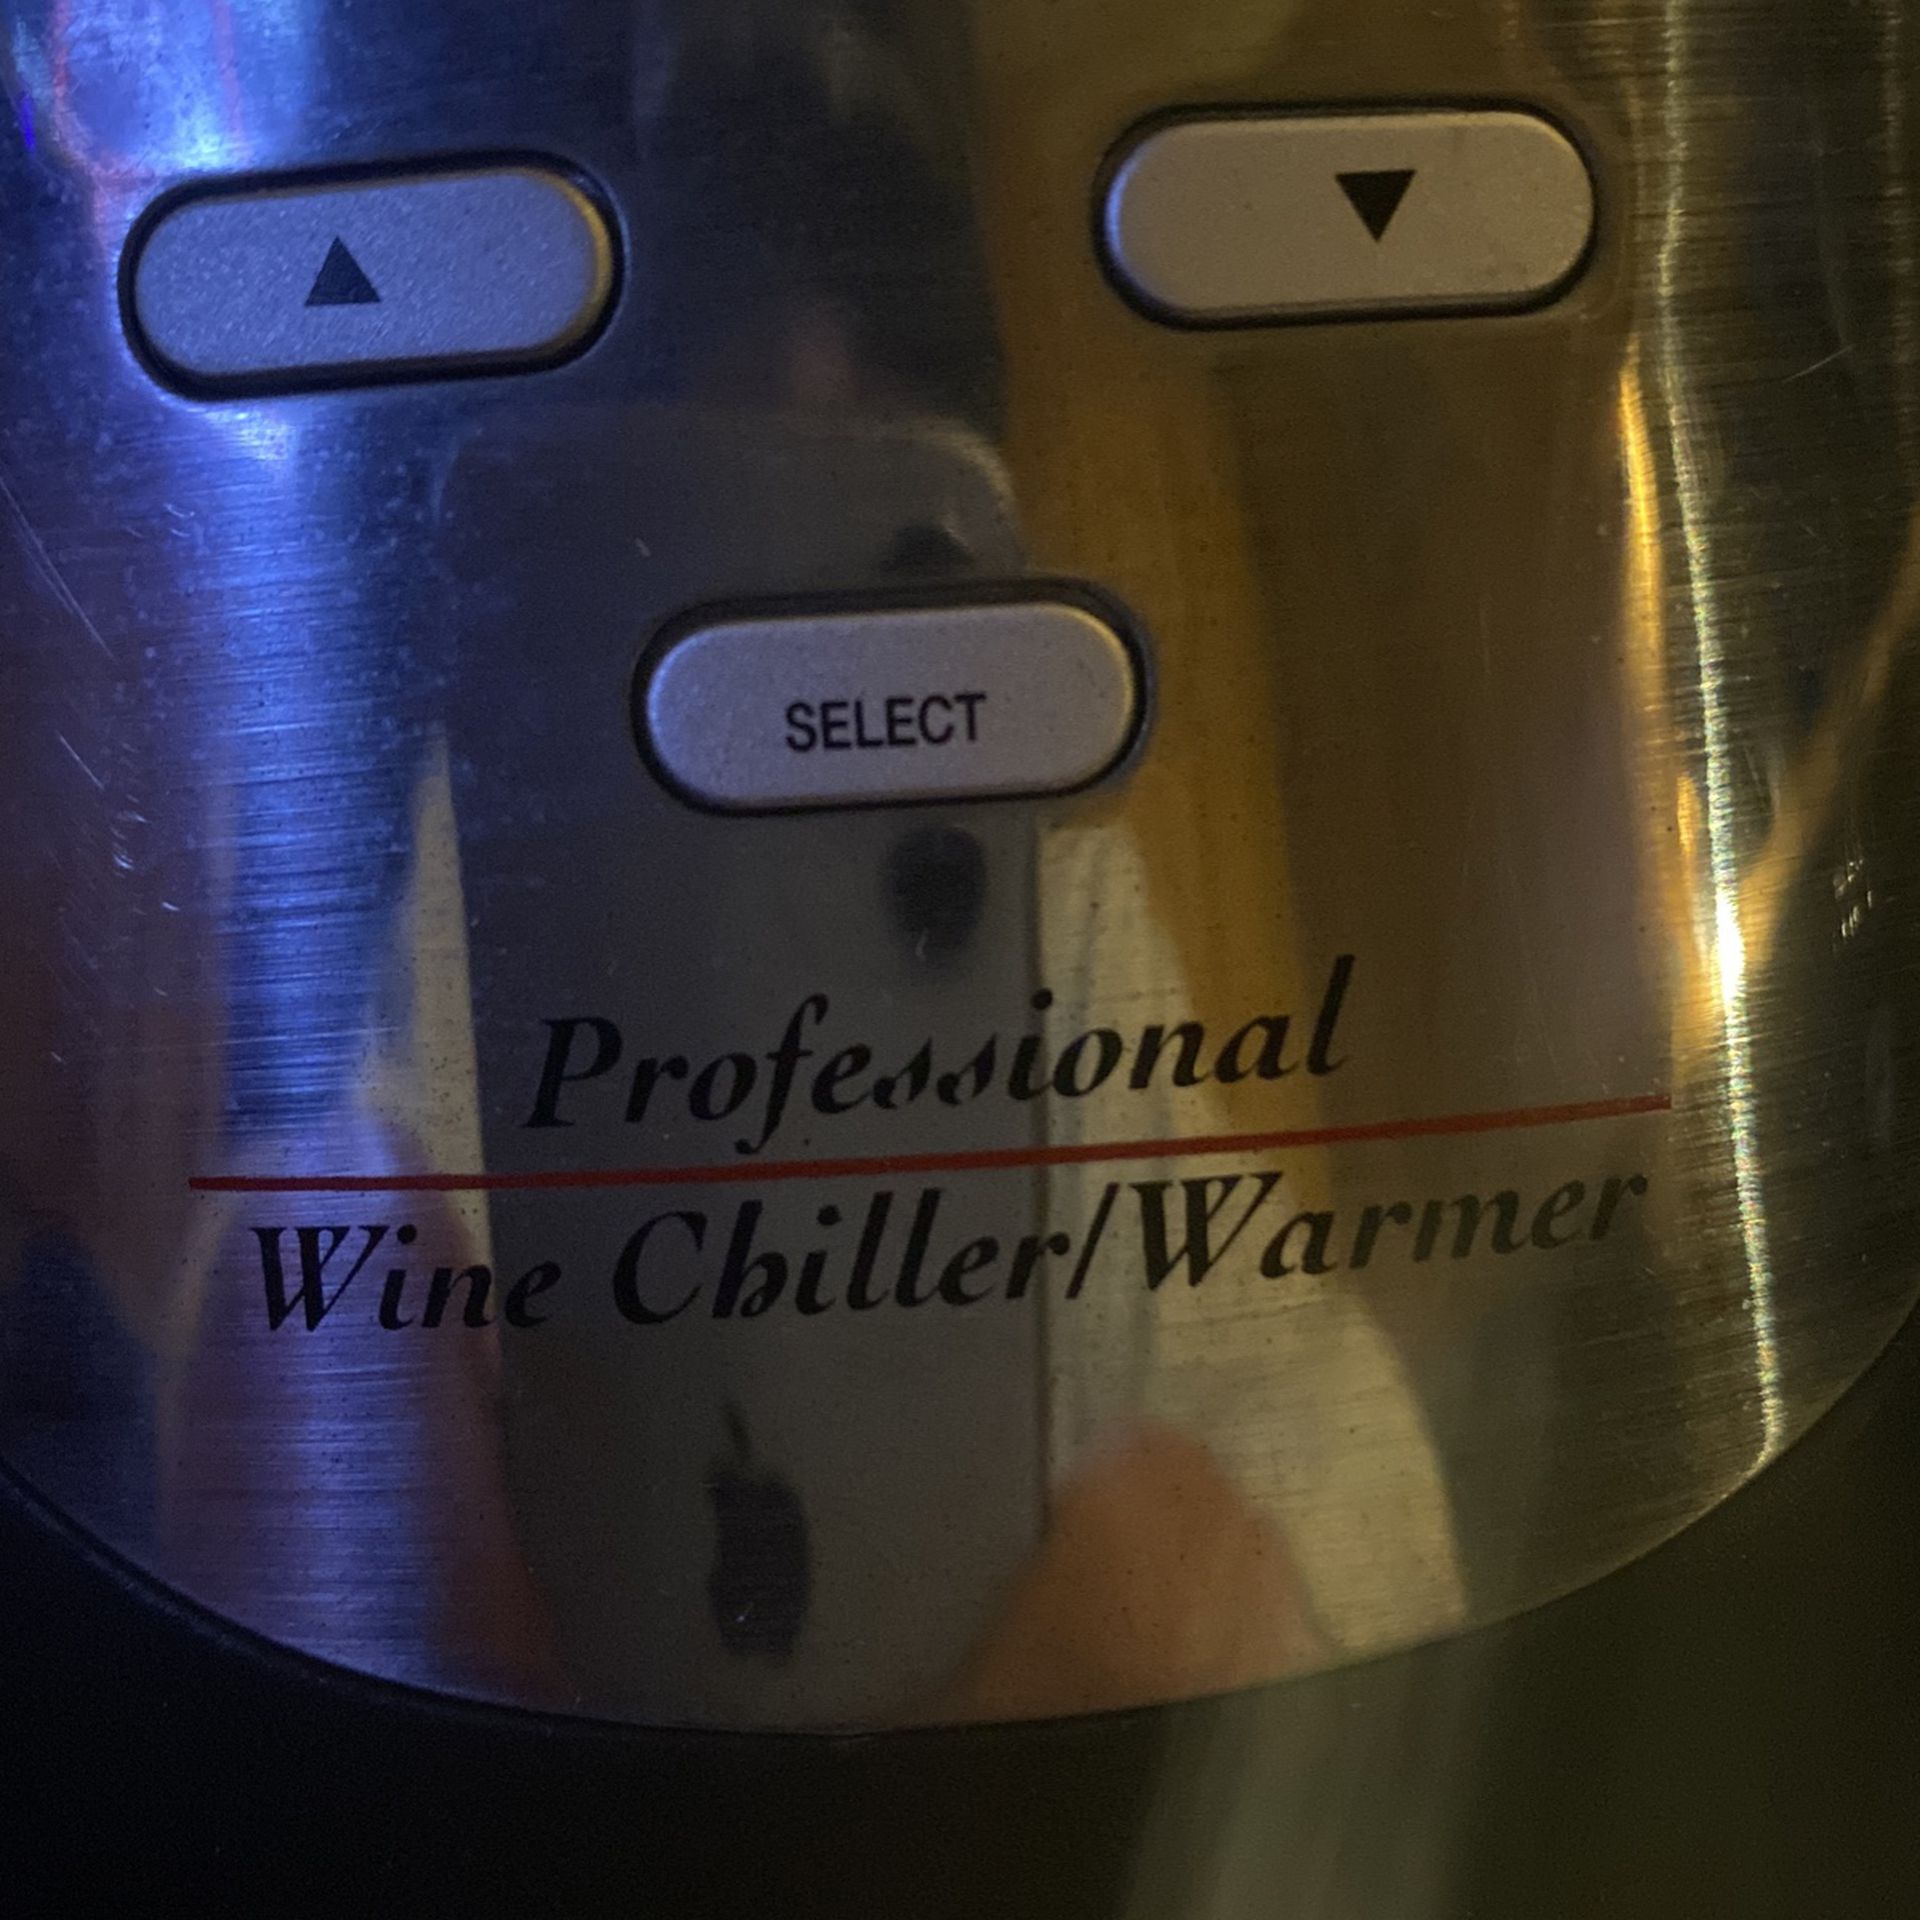 Professional Wine Chiller\ Warmer New Less Then 1/3 Price From Amazon Great Deal!!! 70$   